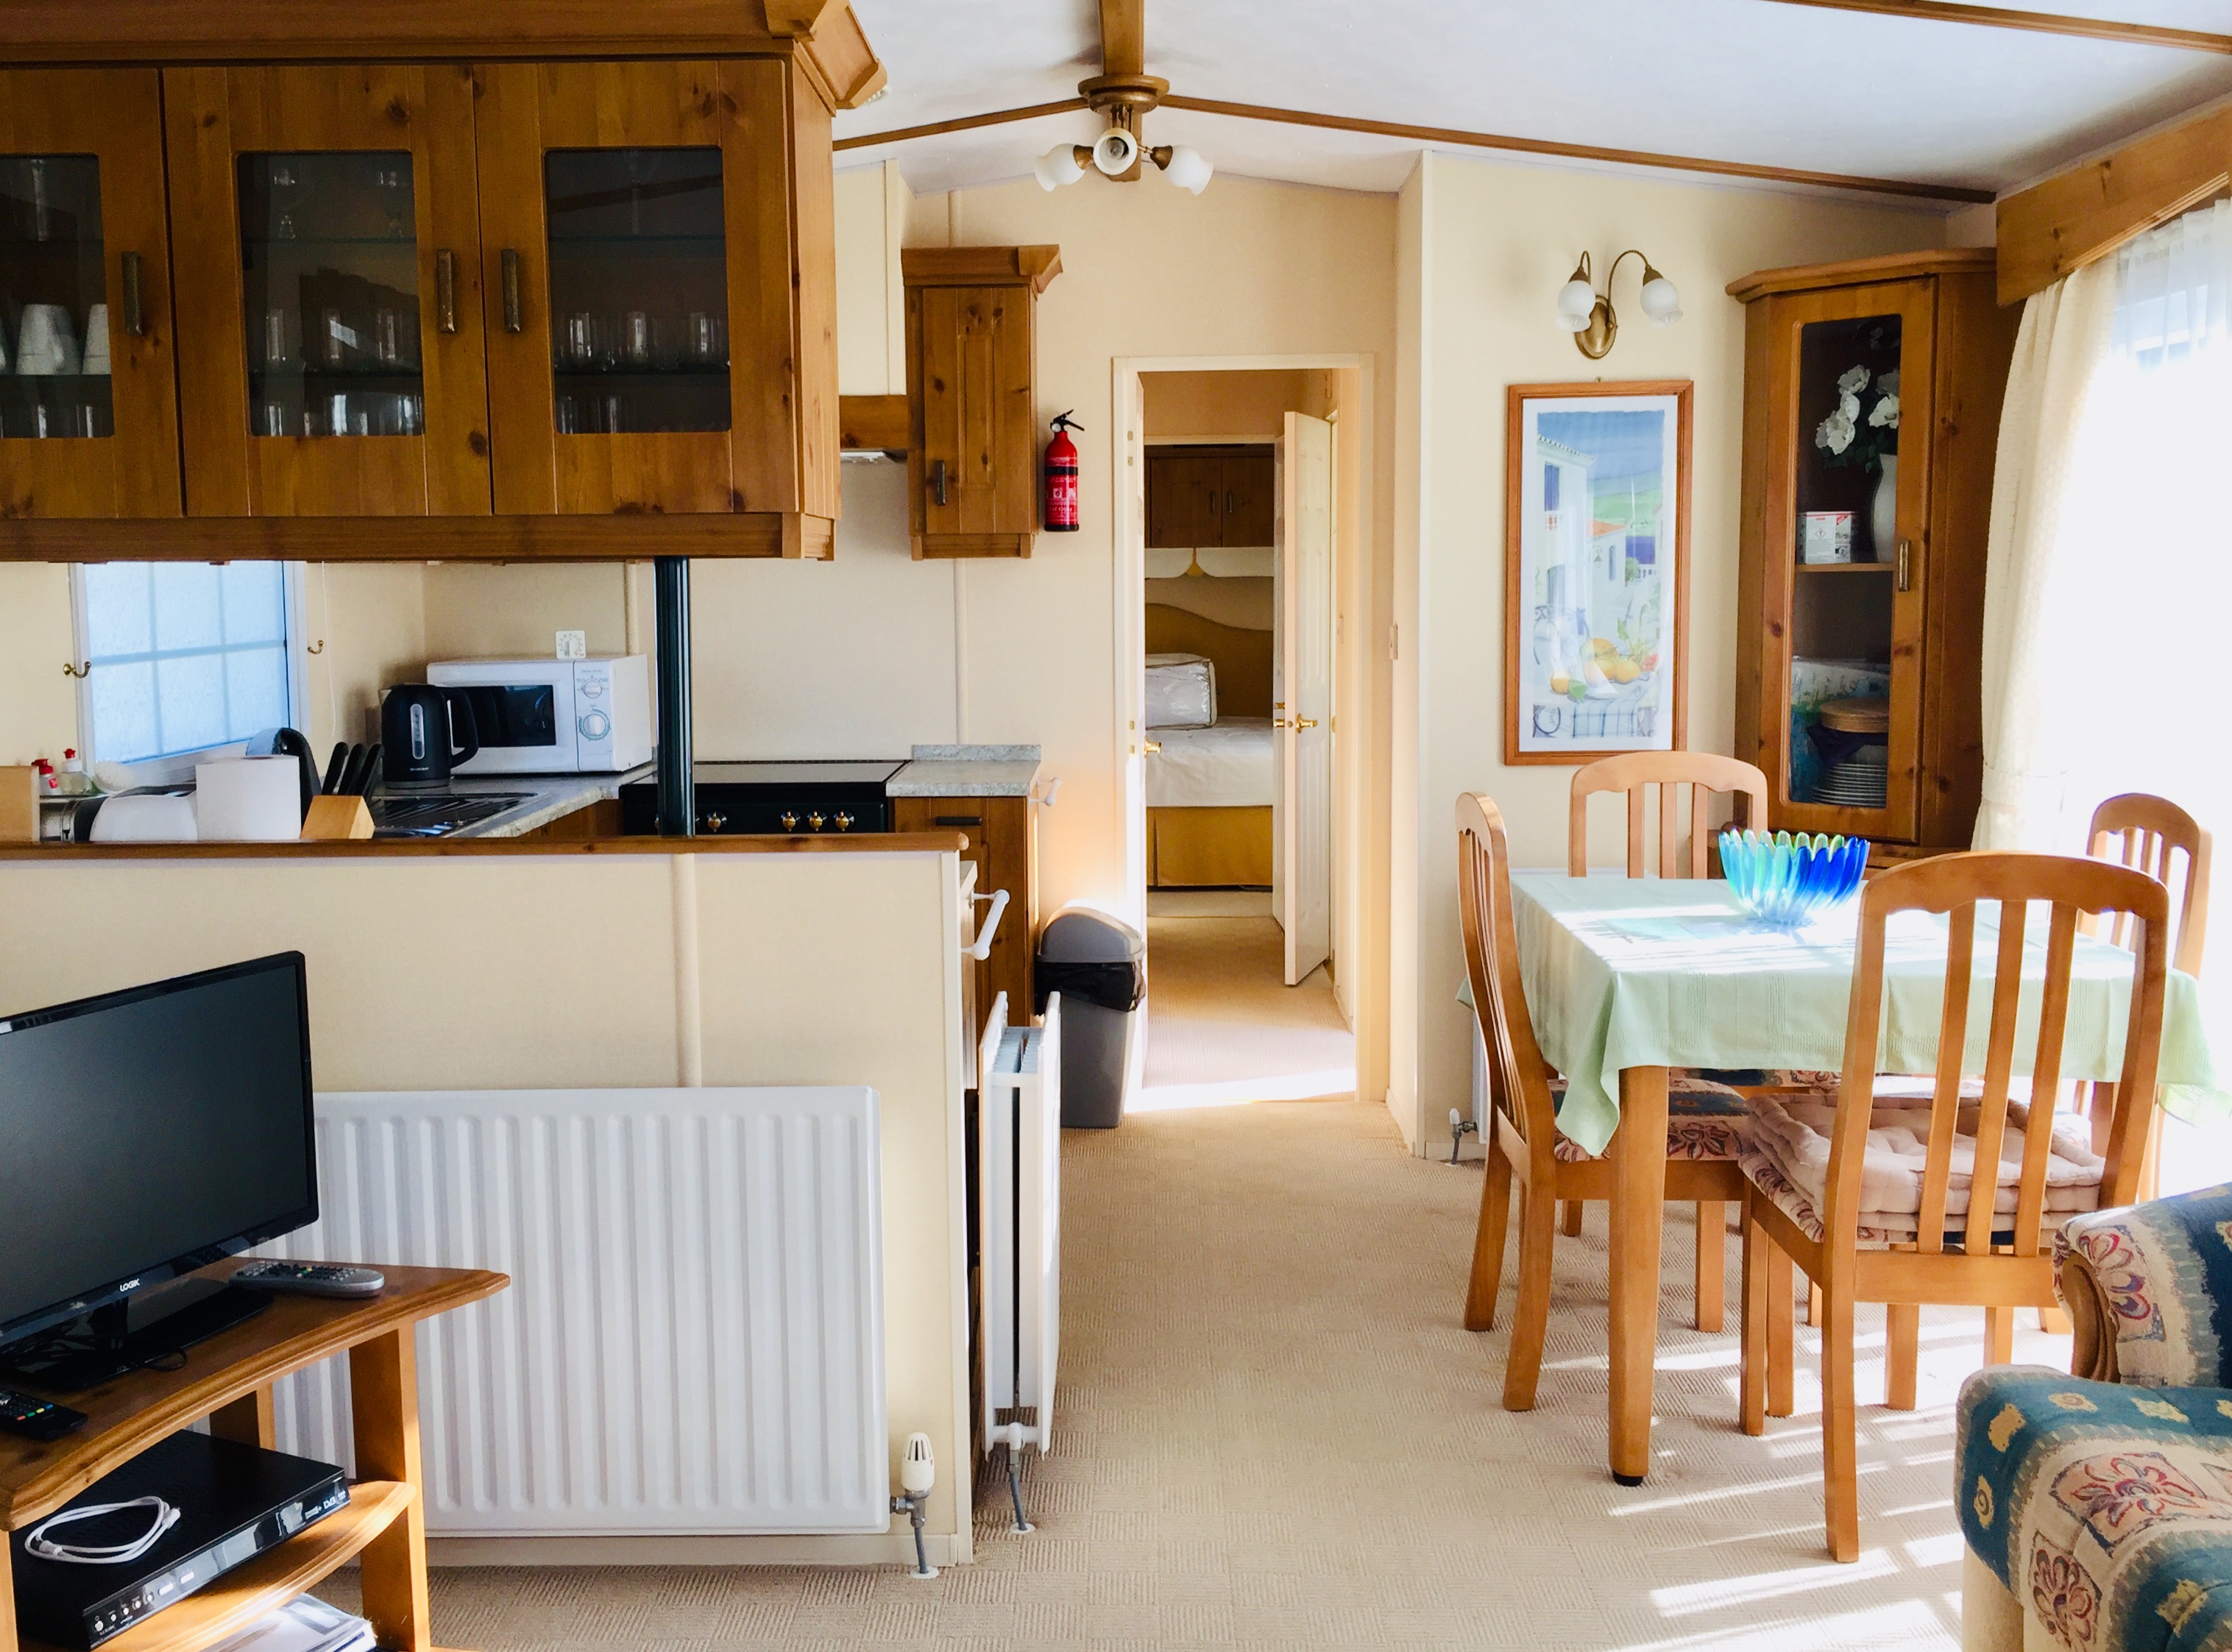 used static caravan for sale in North Devon countryside